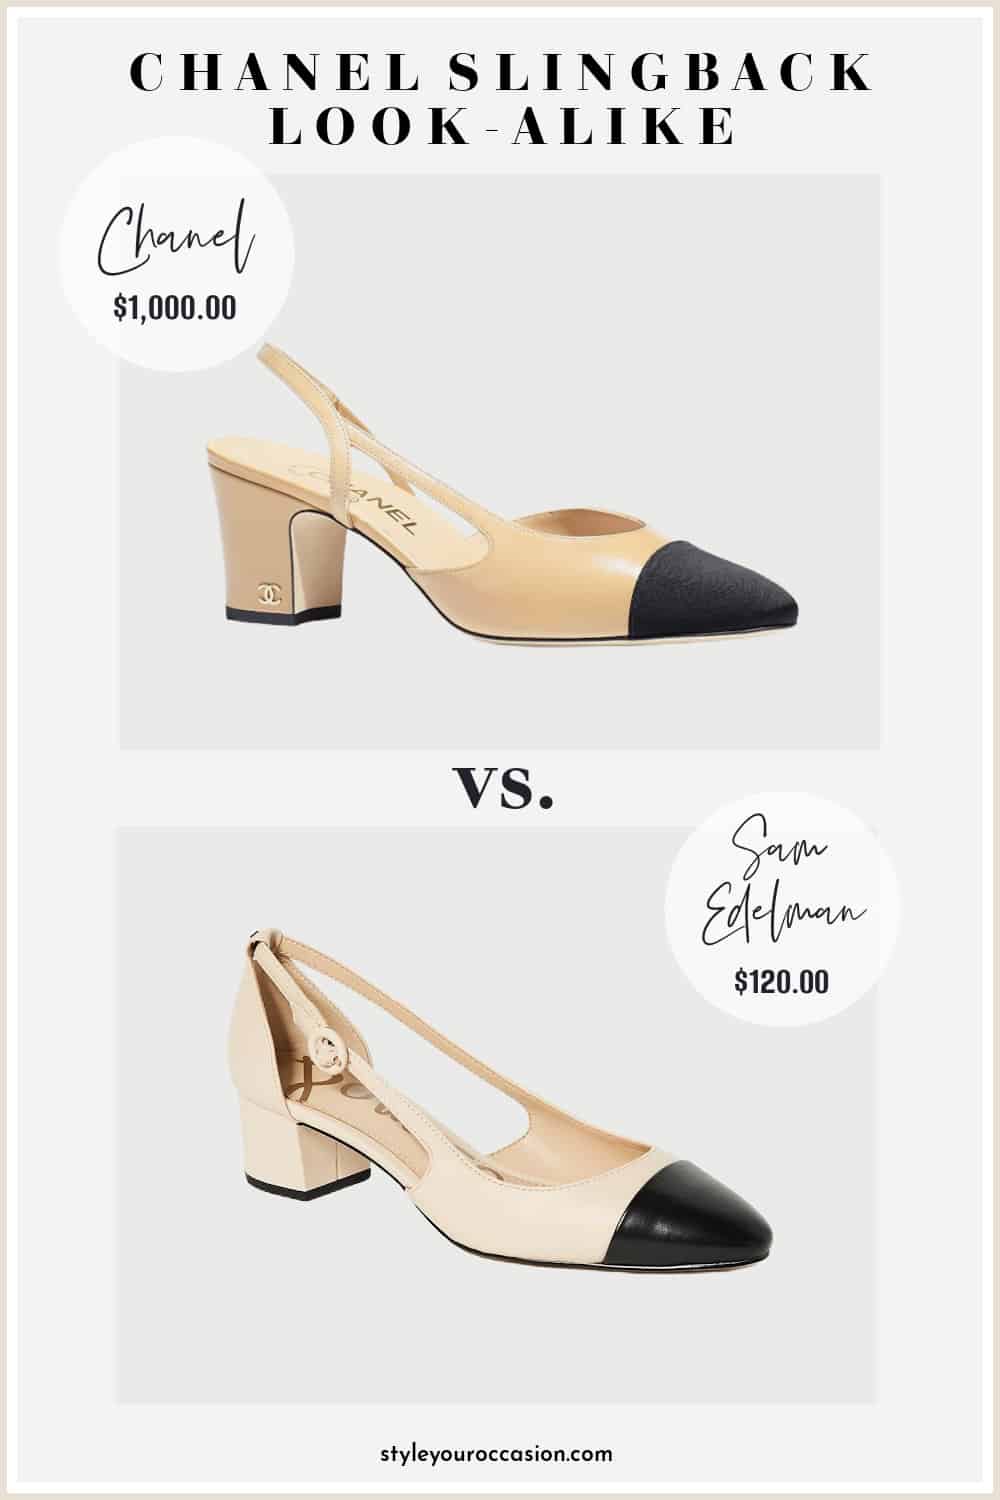 image comparing a Chanel slingback pump with a very good look-alike shoe